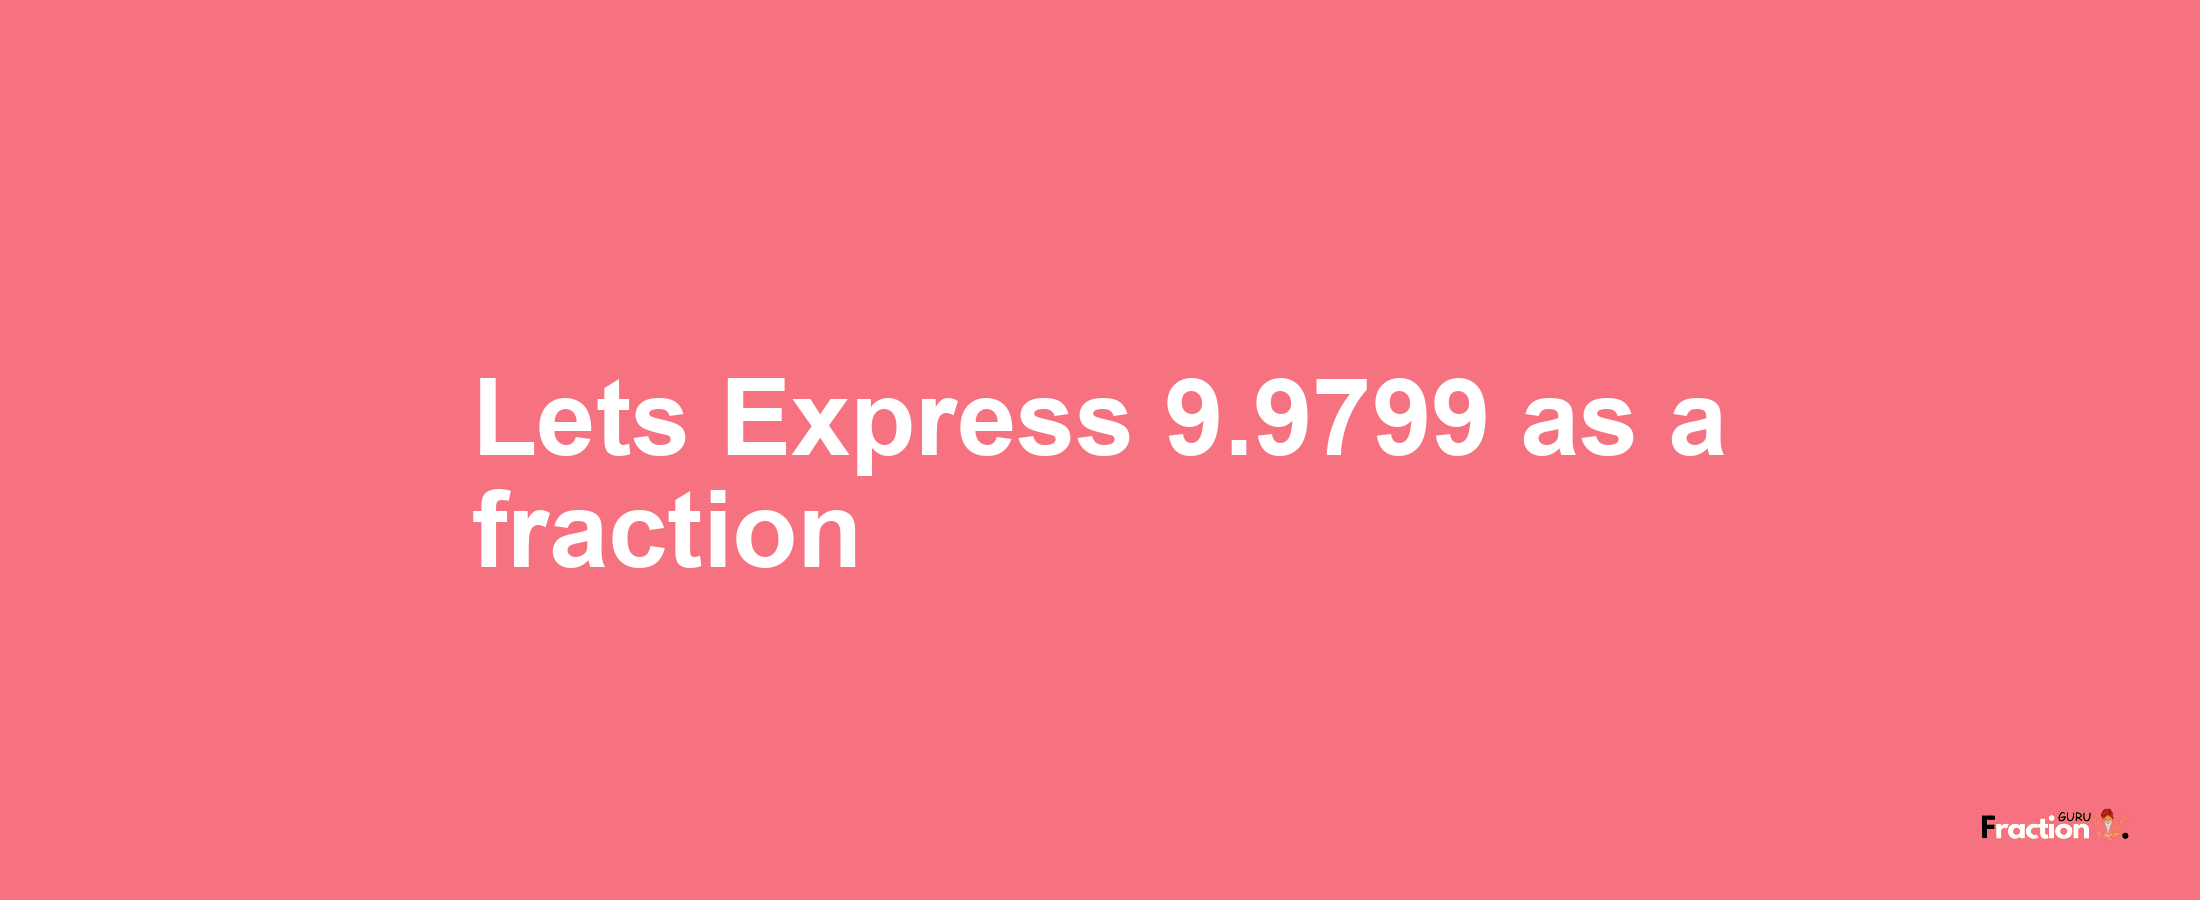 Lets Express 9.9799 as afraction